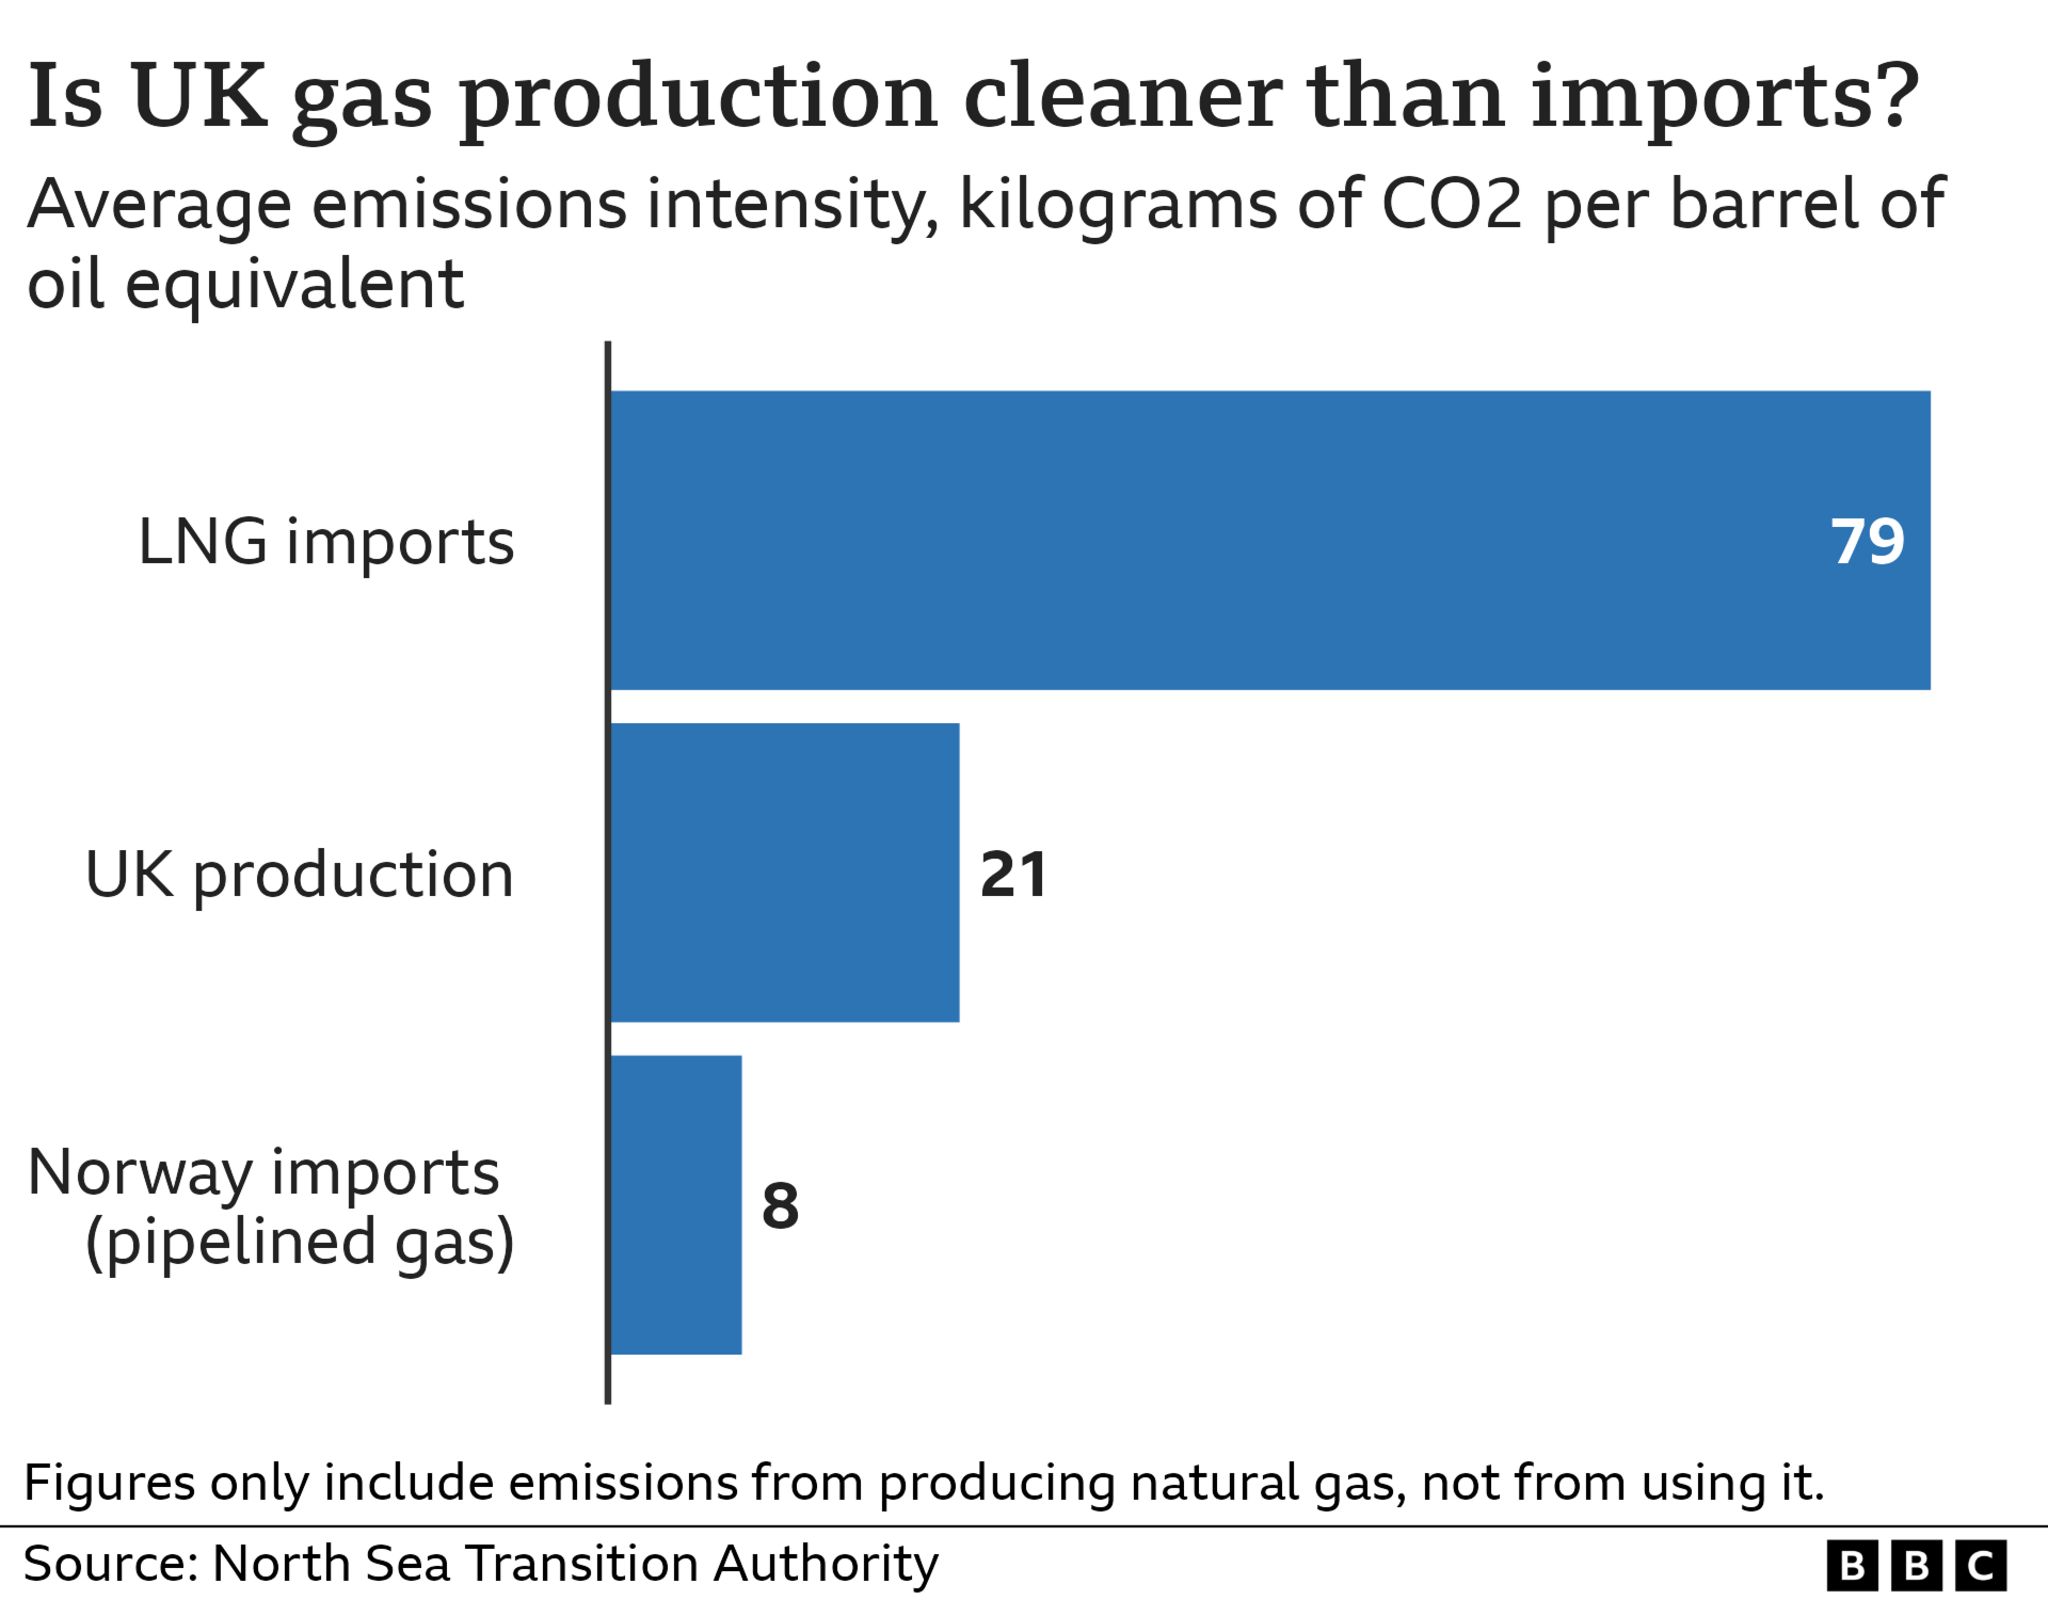 Chart showing average emissions intensity from producing natural gas, in kilograms of CO2 per barrel of oil equivalent: LNG (79), UK production (21), Norway imports (8)